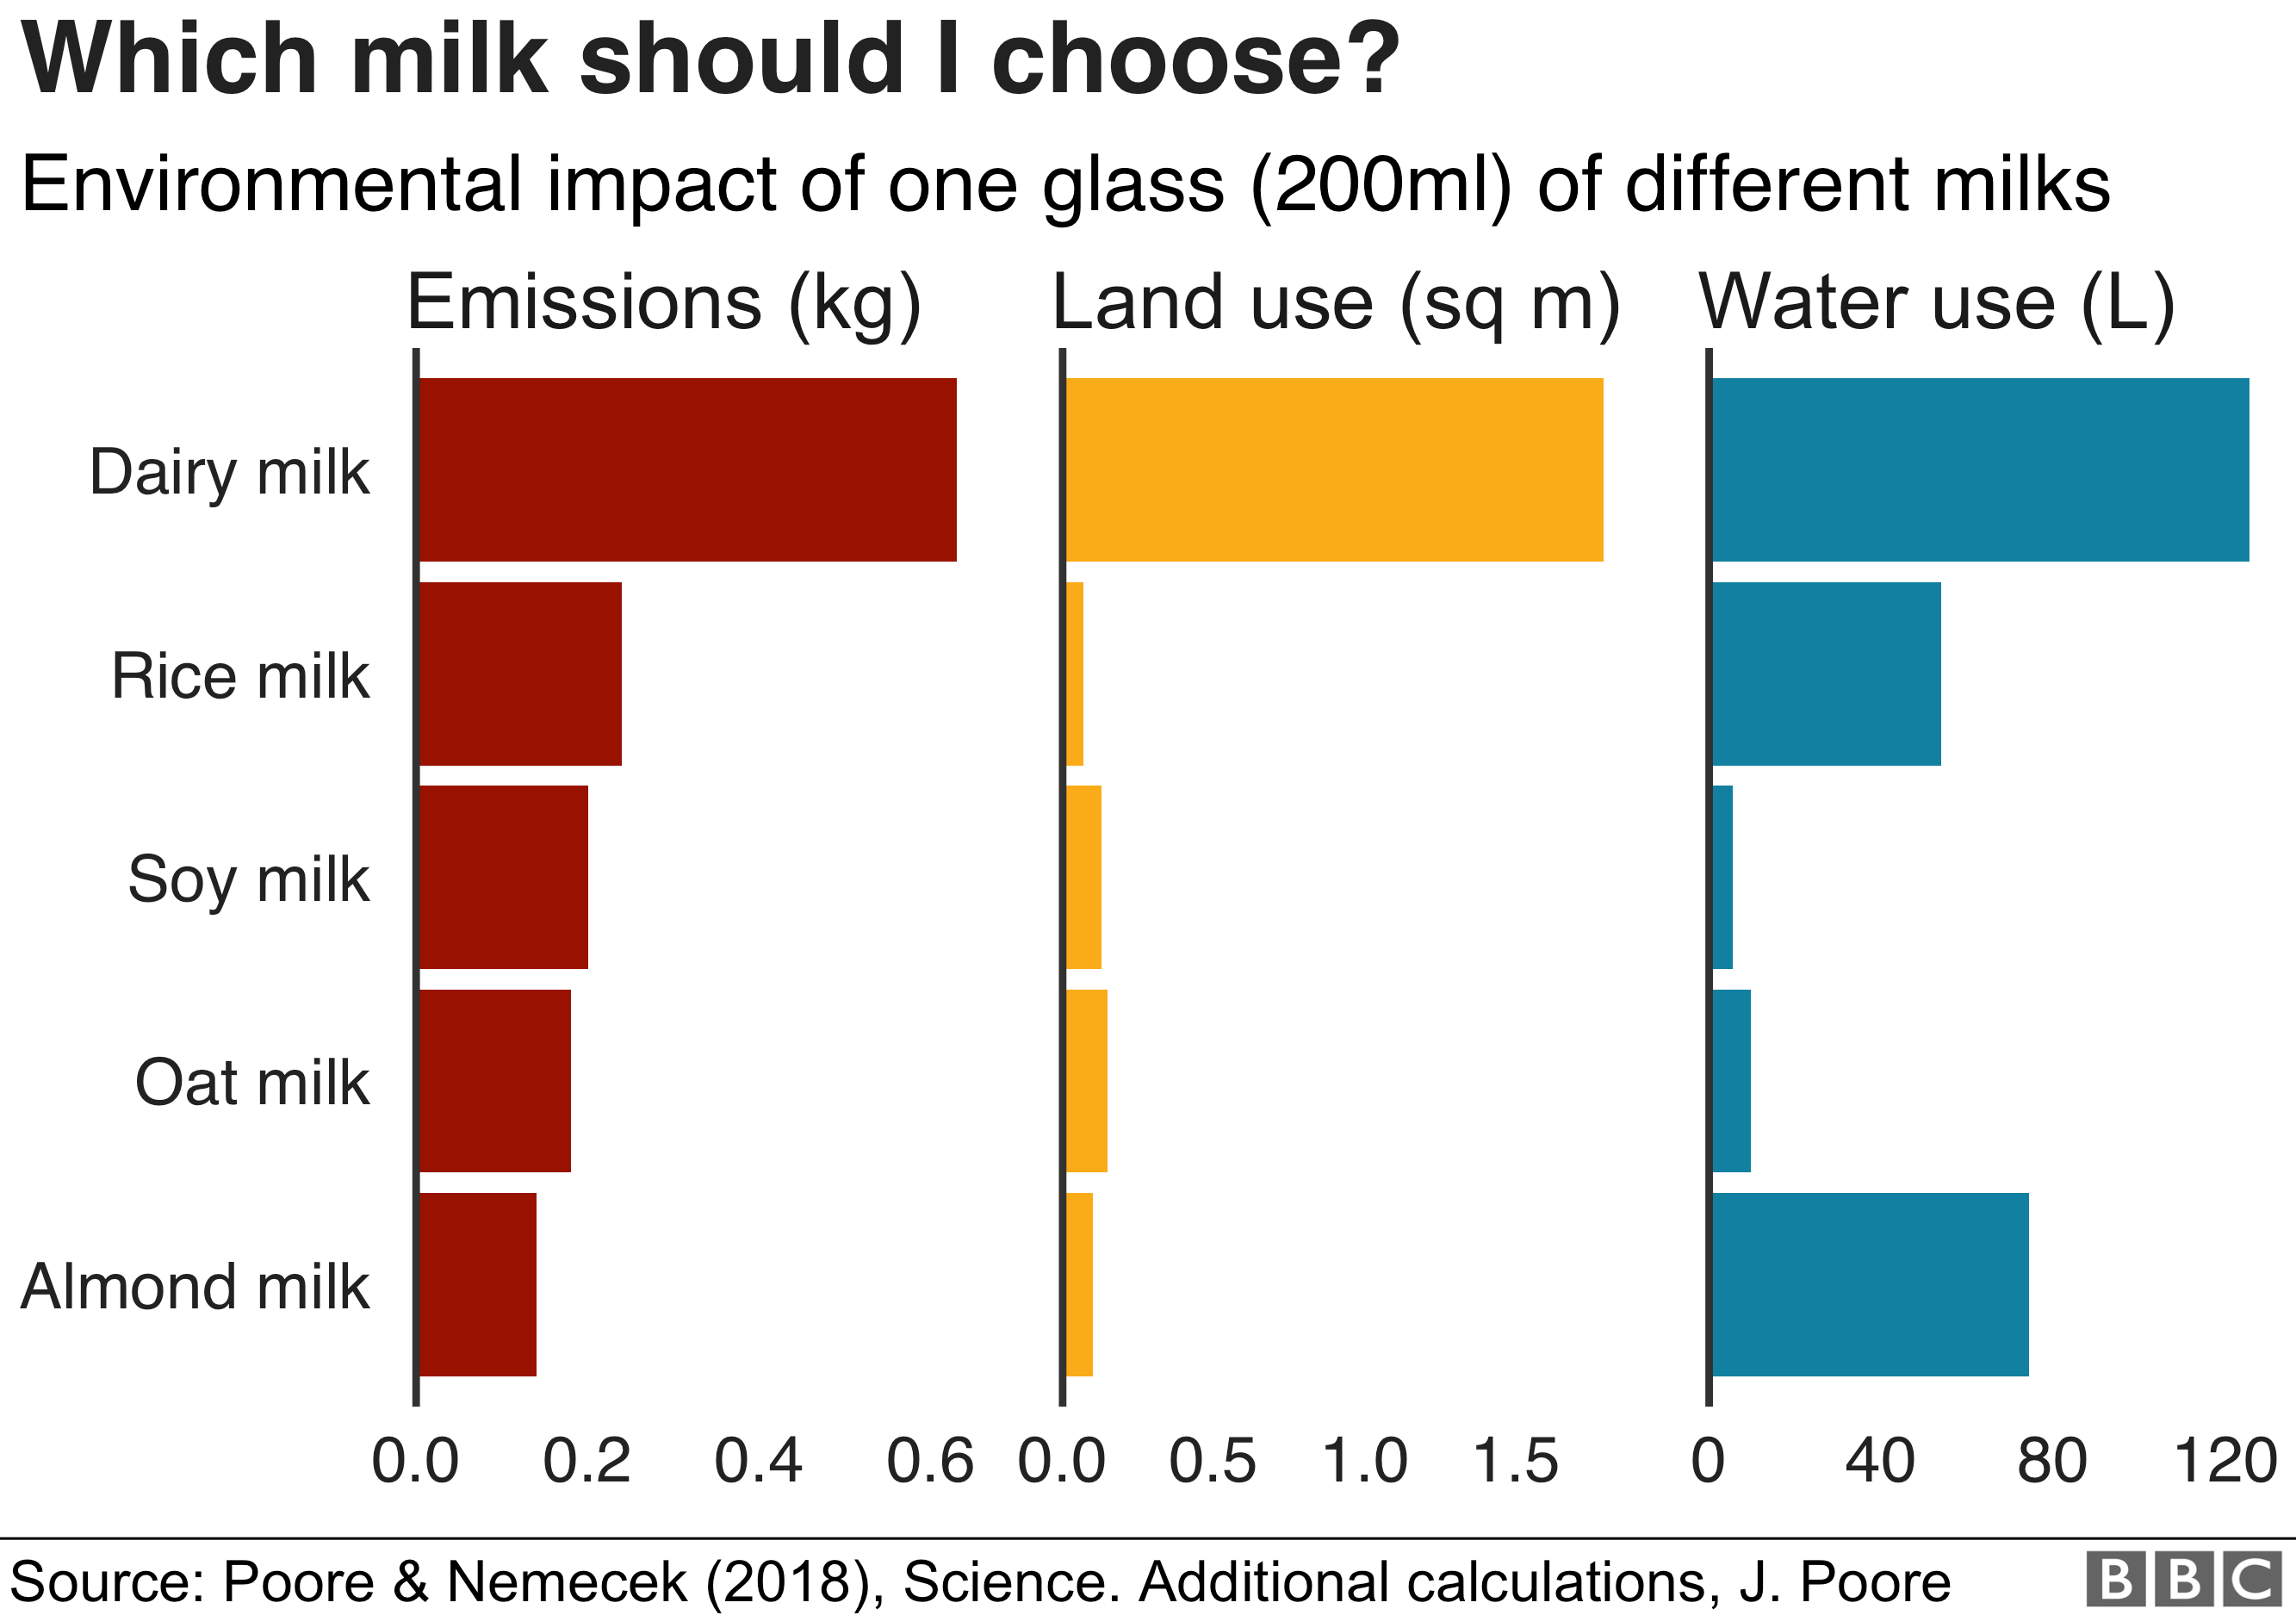 Graph showing the environmental impact oftraditional milk and various dairy free milk alternatives. Yet another reason to choose dairy free chocolate!